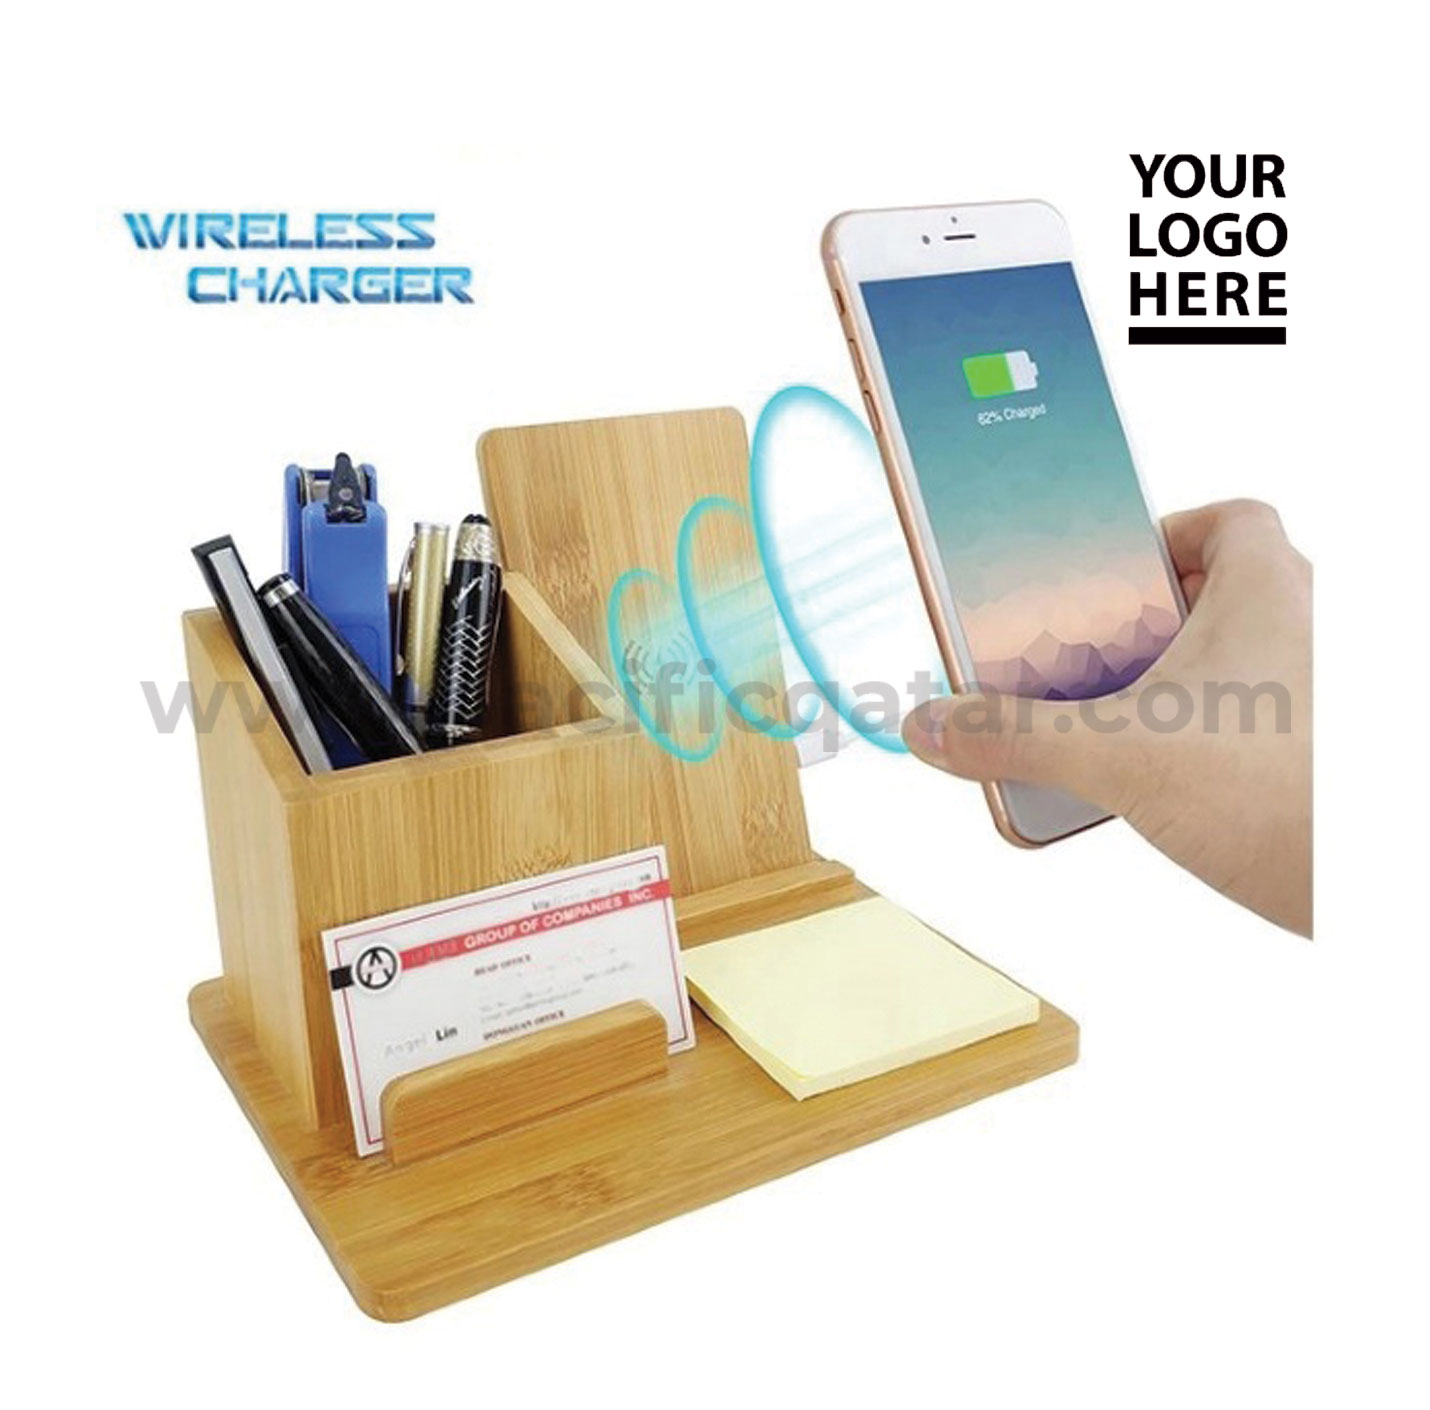 Bamboo wireless fast charger set with stationary organizer